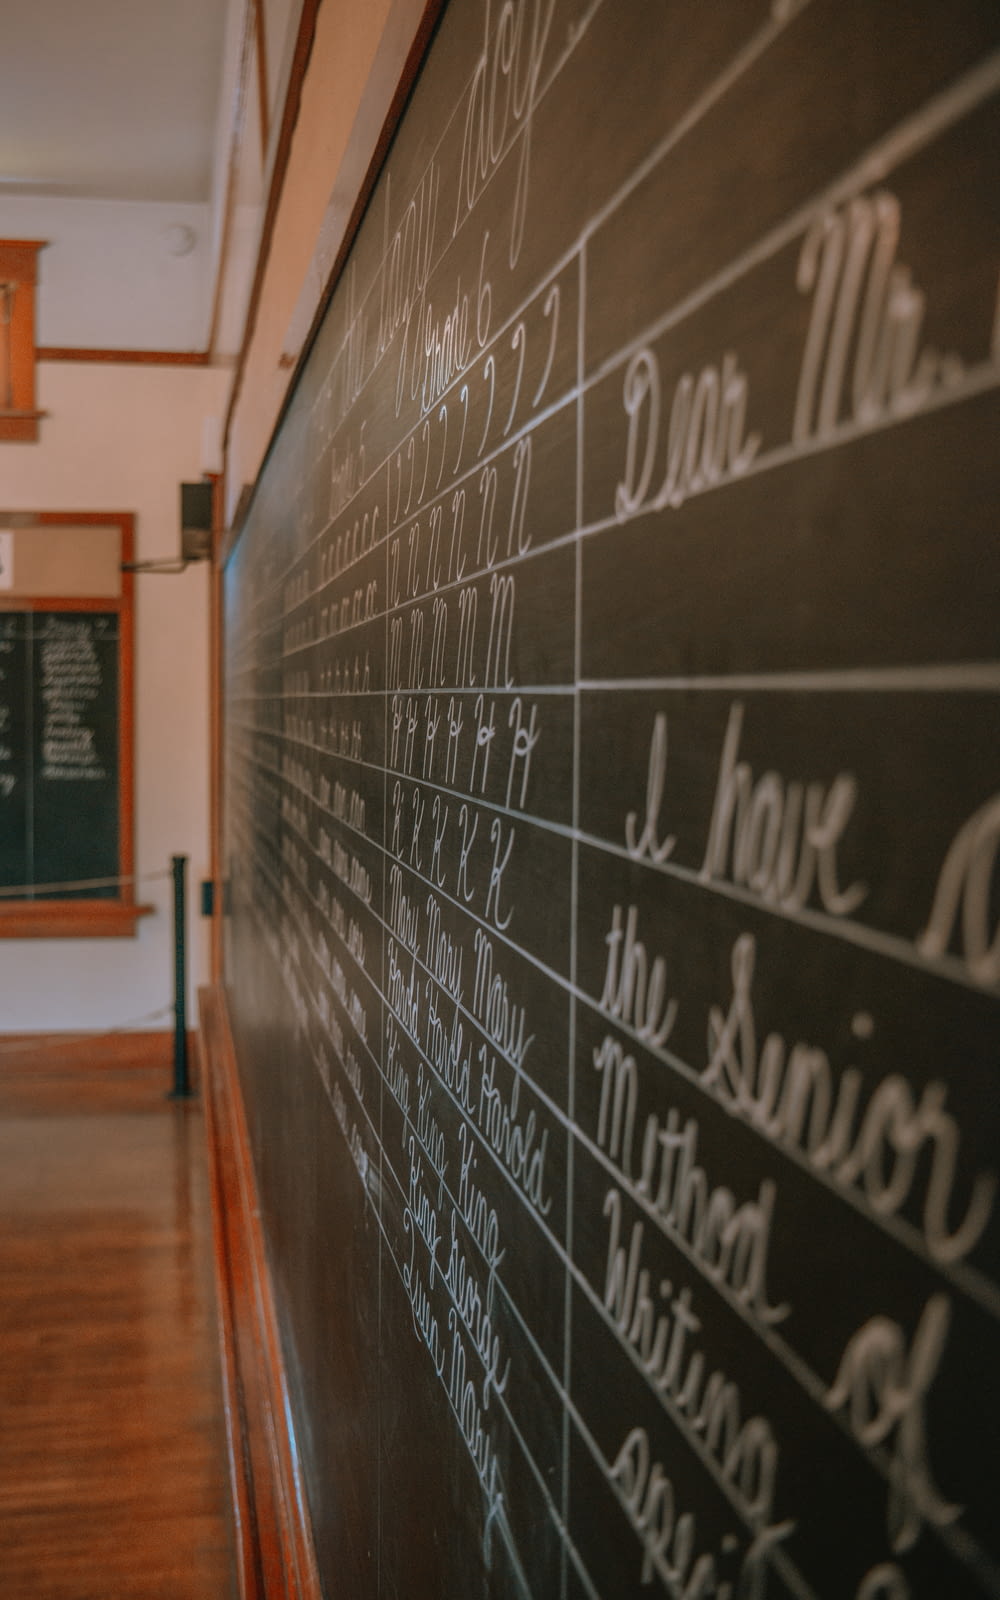 a blackboard with writing on it in a room